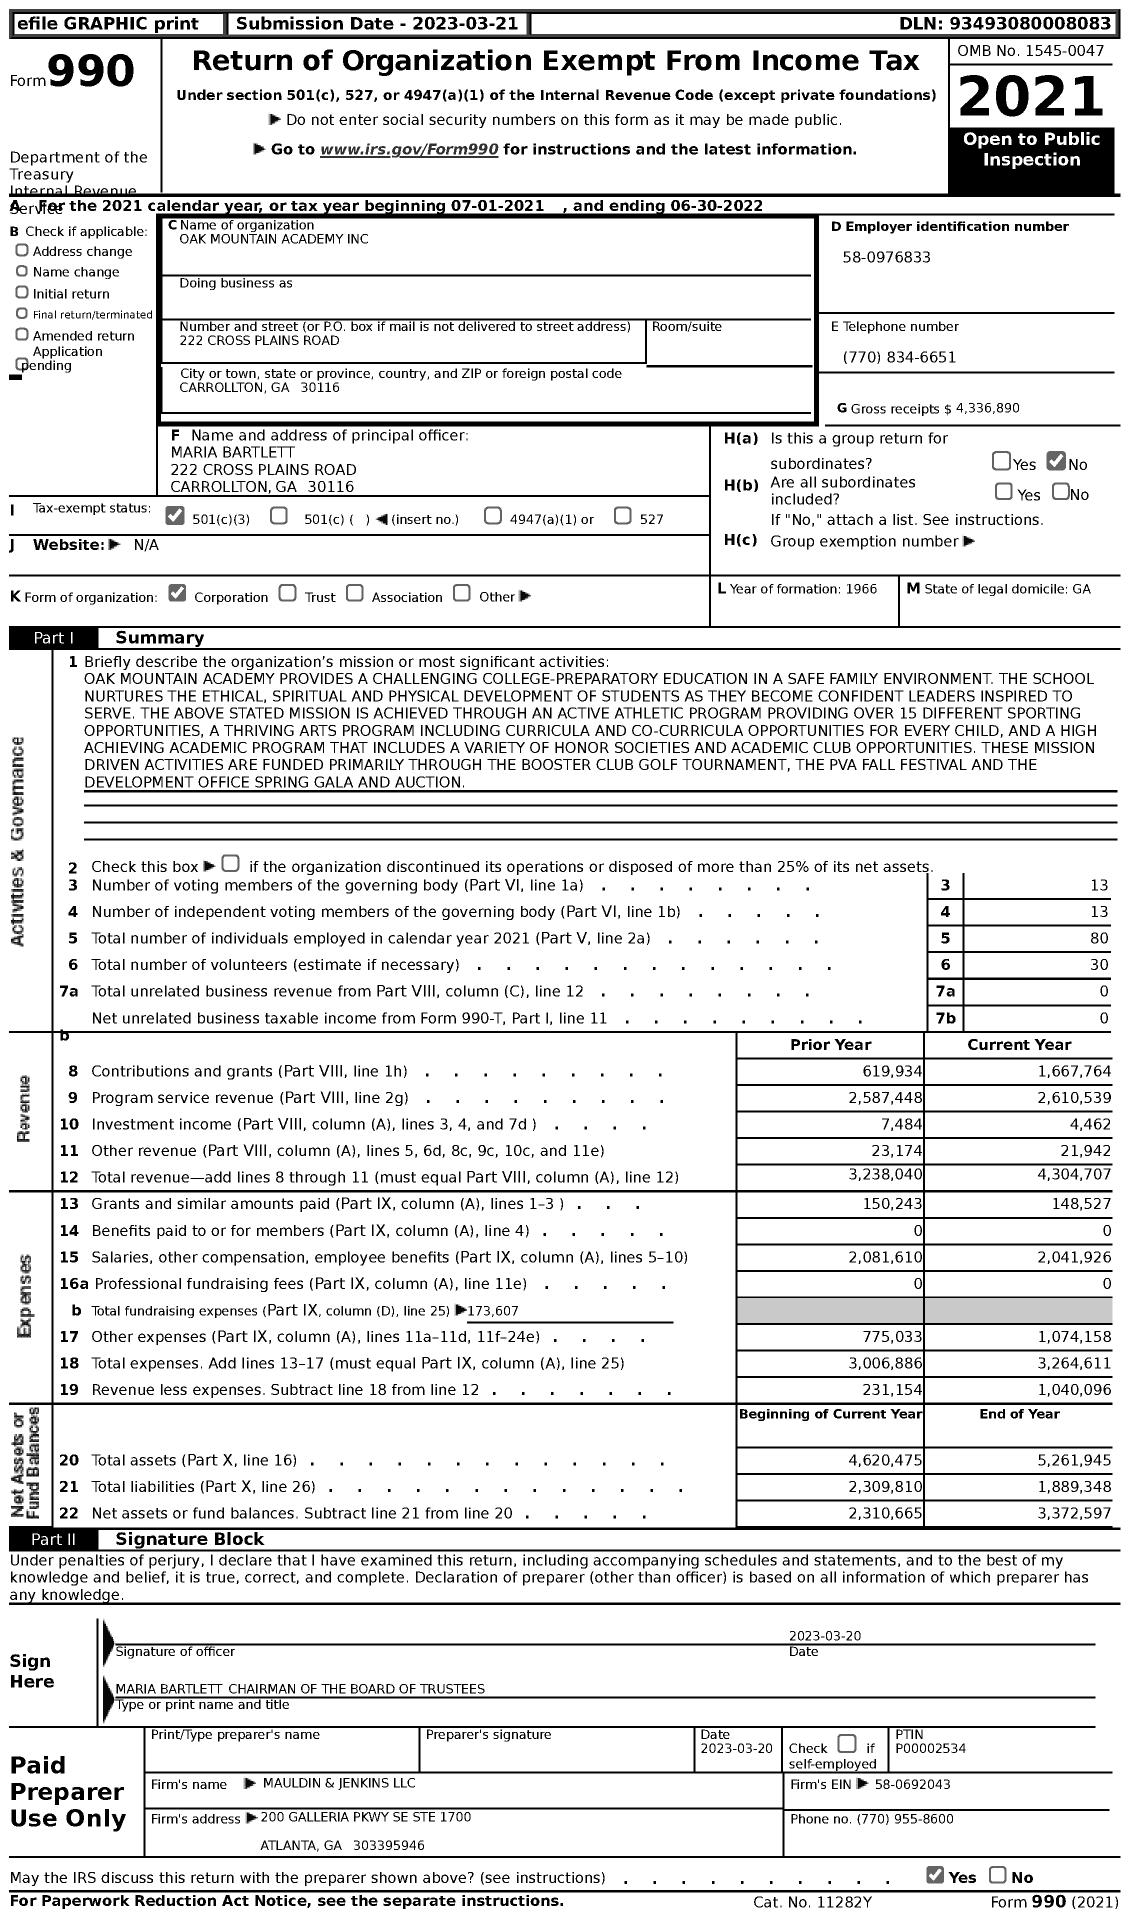 Image of first page of 2021 Form 990 for Oak Mountain Academy (OMA)